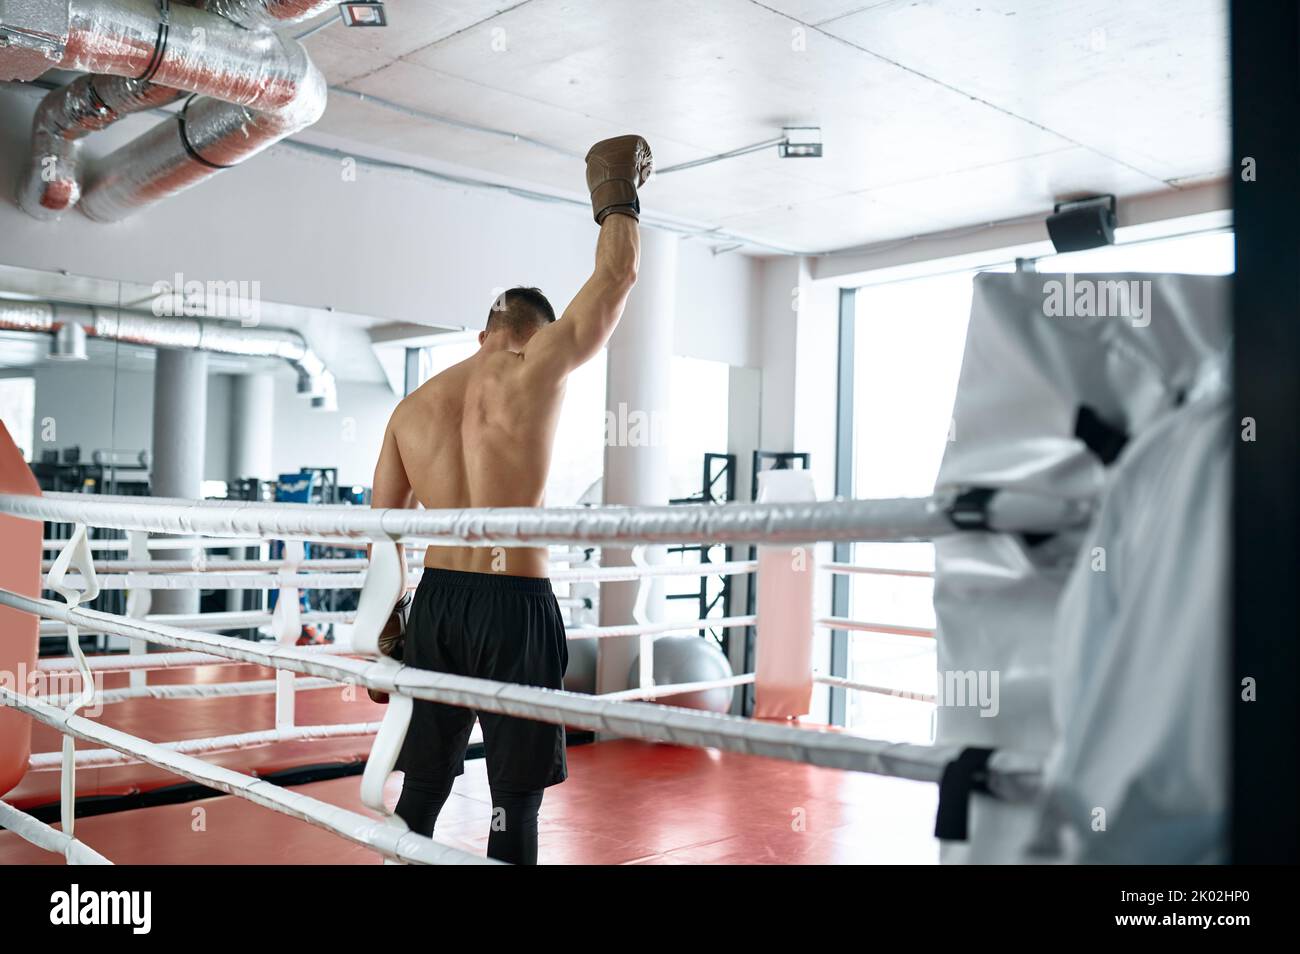 View from back on boxer with raised hand in boxing glove Stock Photo